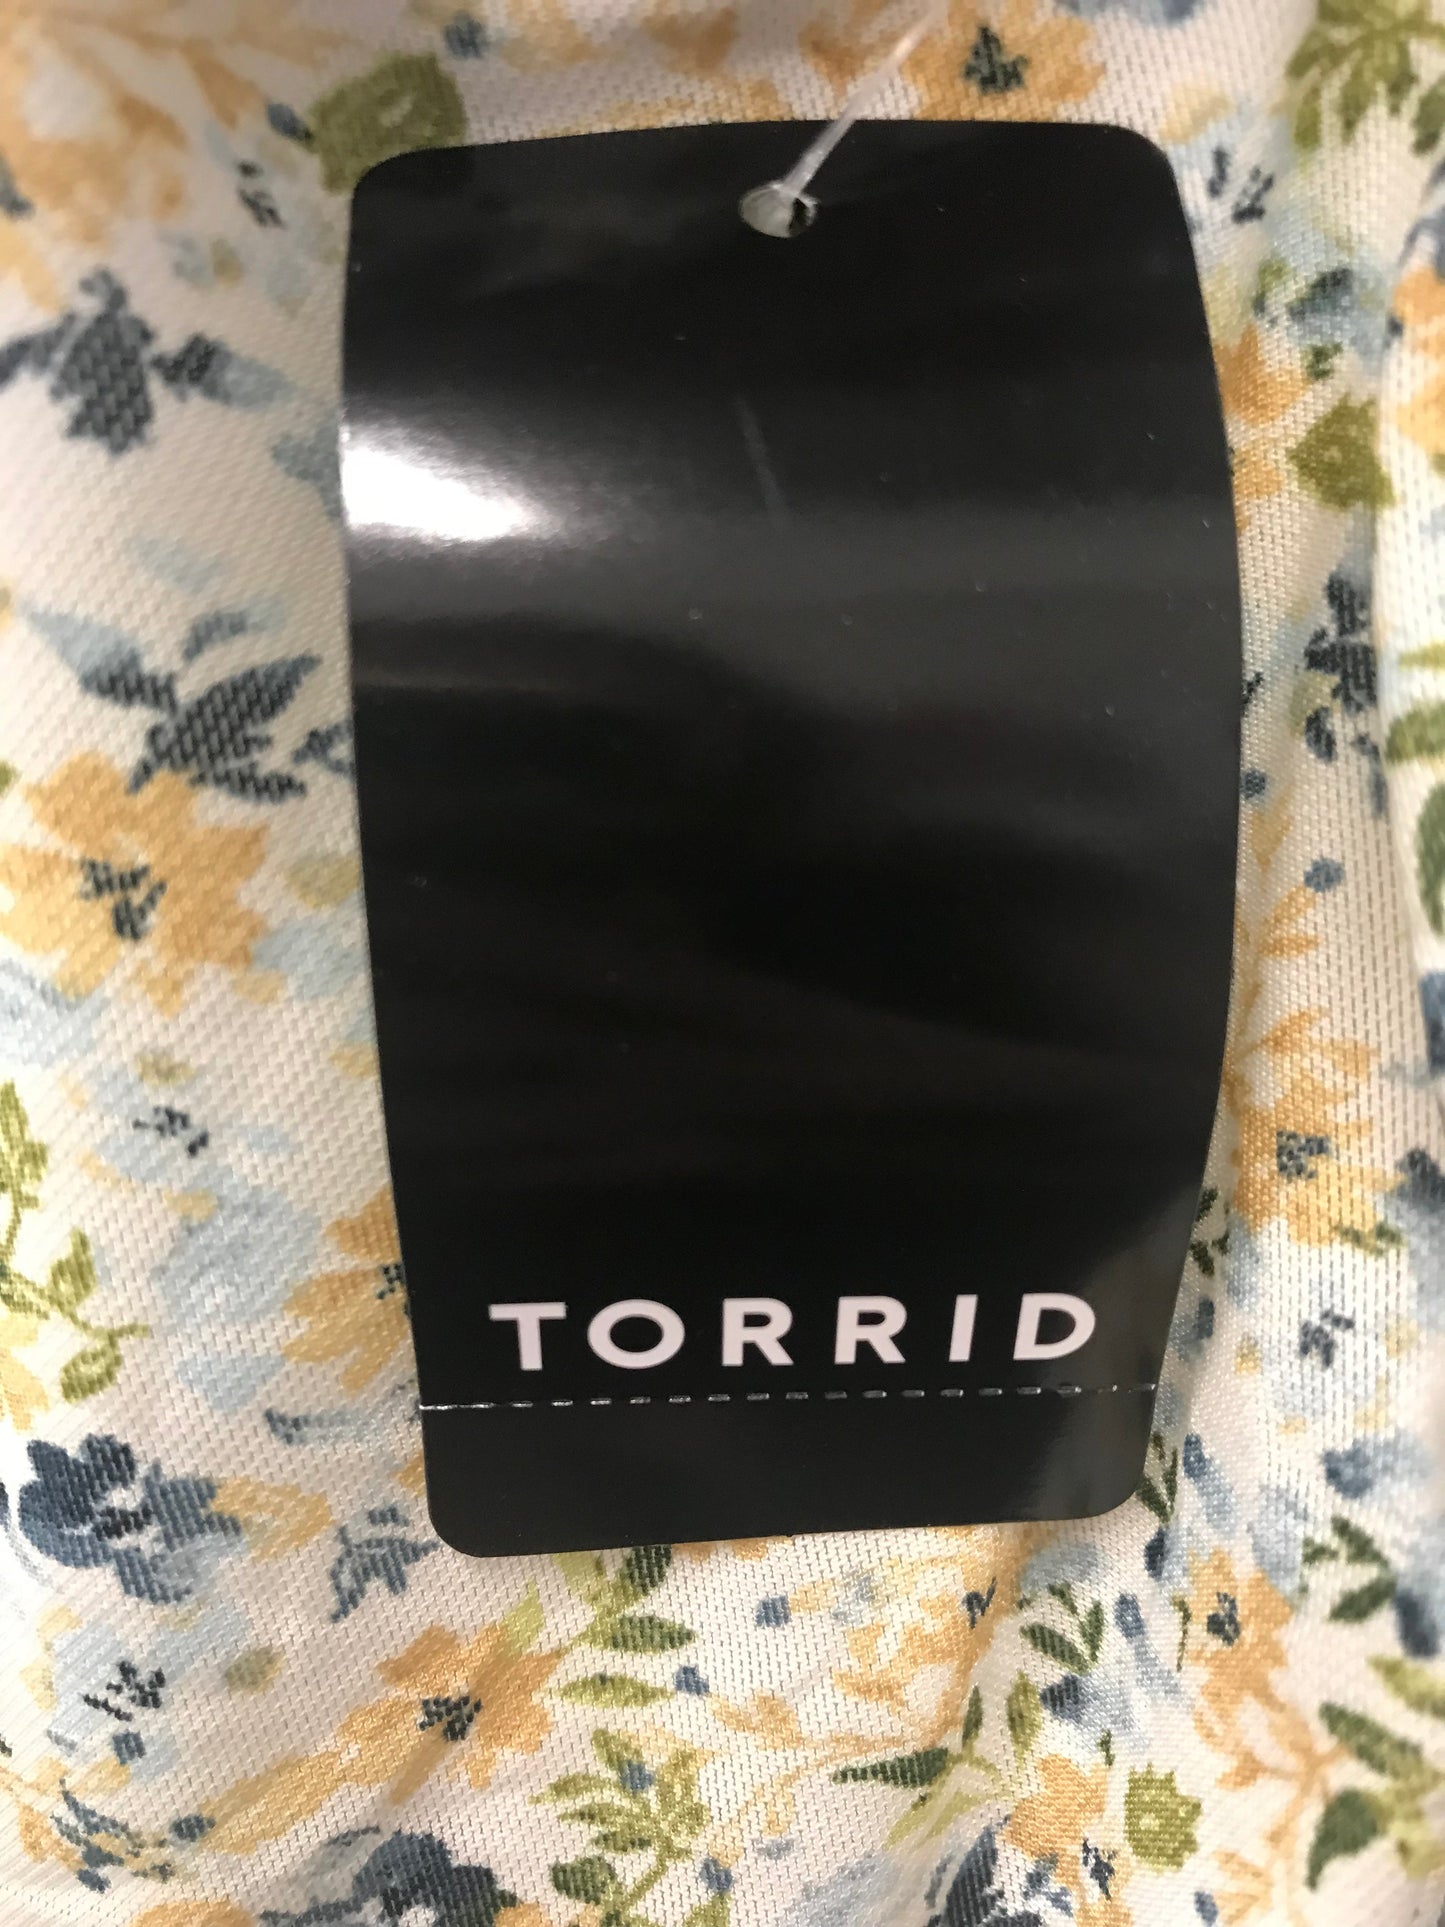 Floral Print Top Short Sleeve By Torrid, Size: 2x